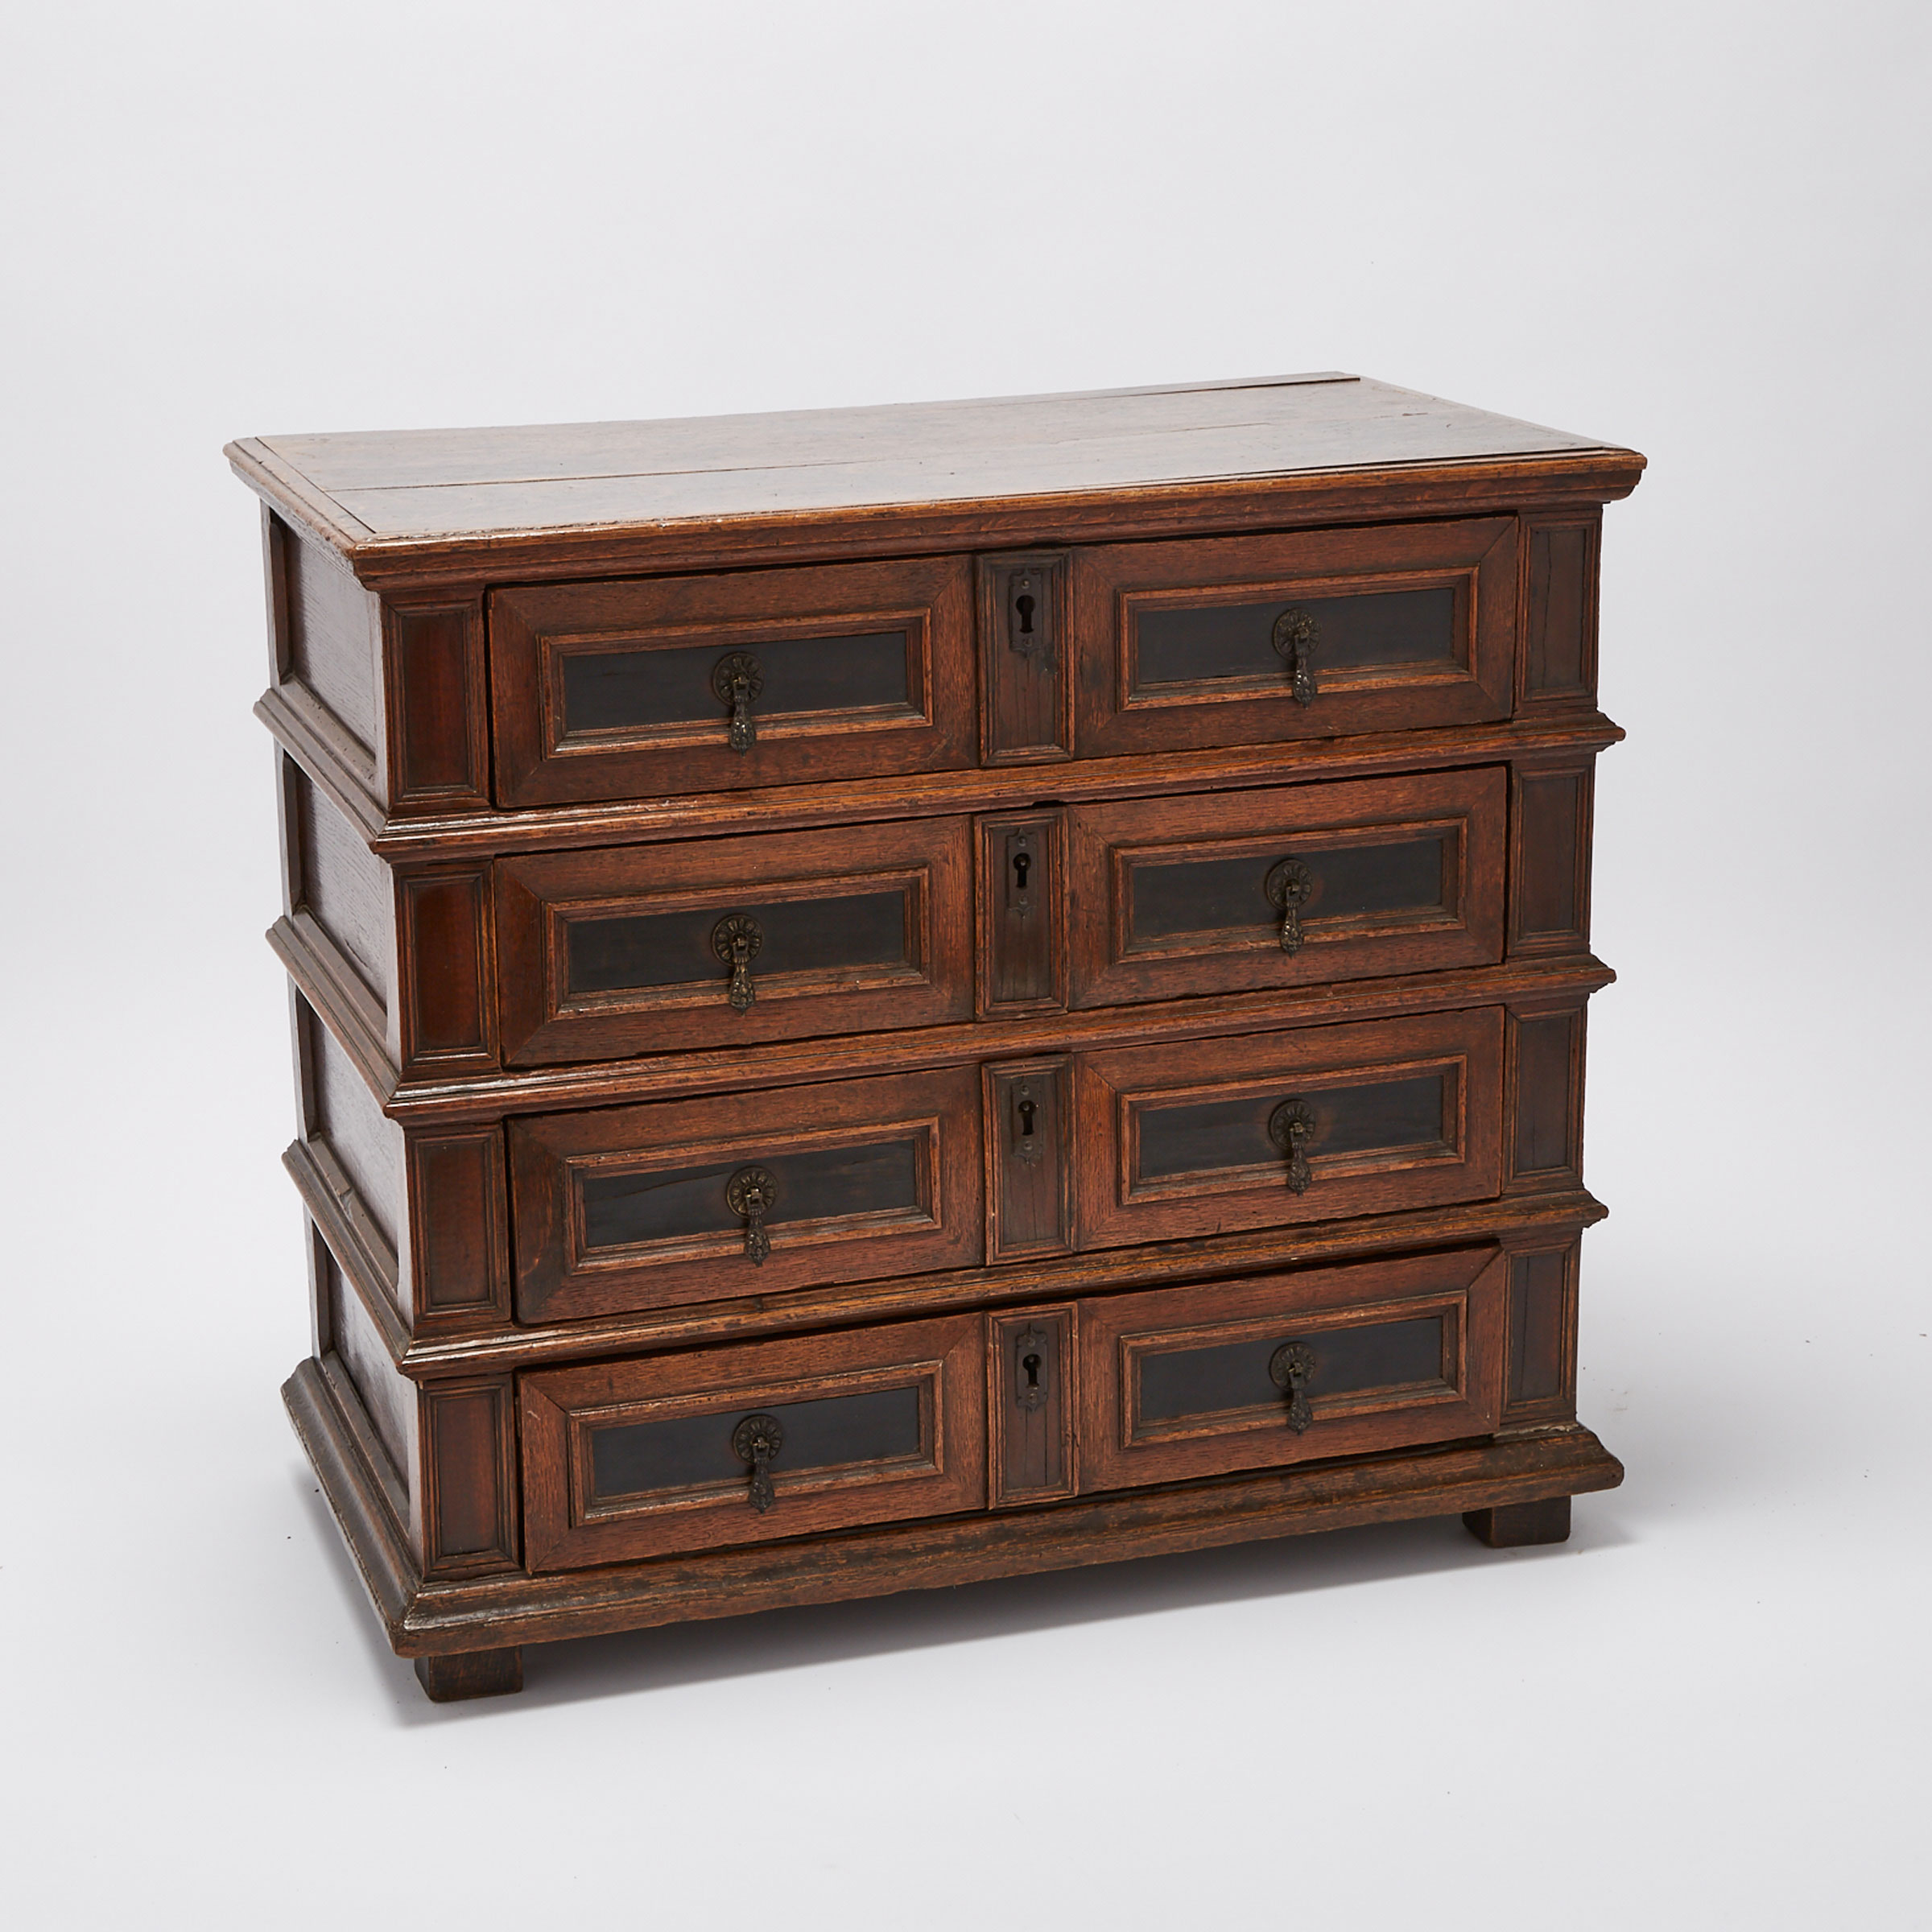 William and Mary Parcel Ebonized Oak Chest of Drawers, early 18th century